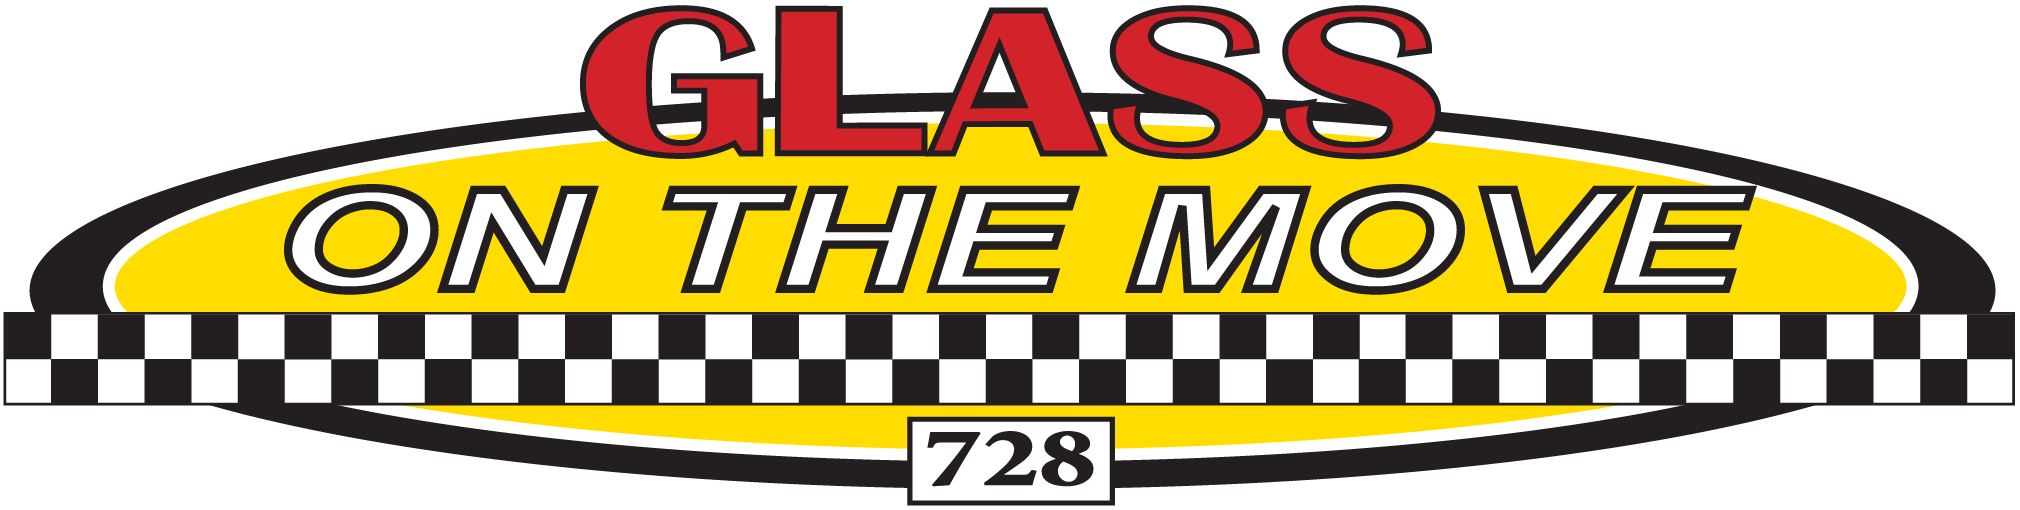 Glass on the move logo